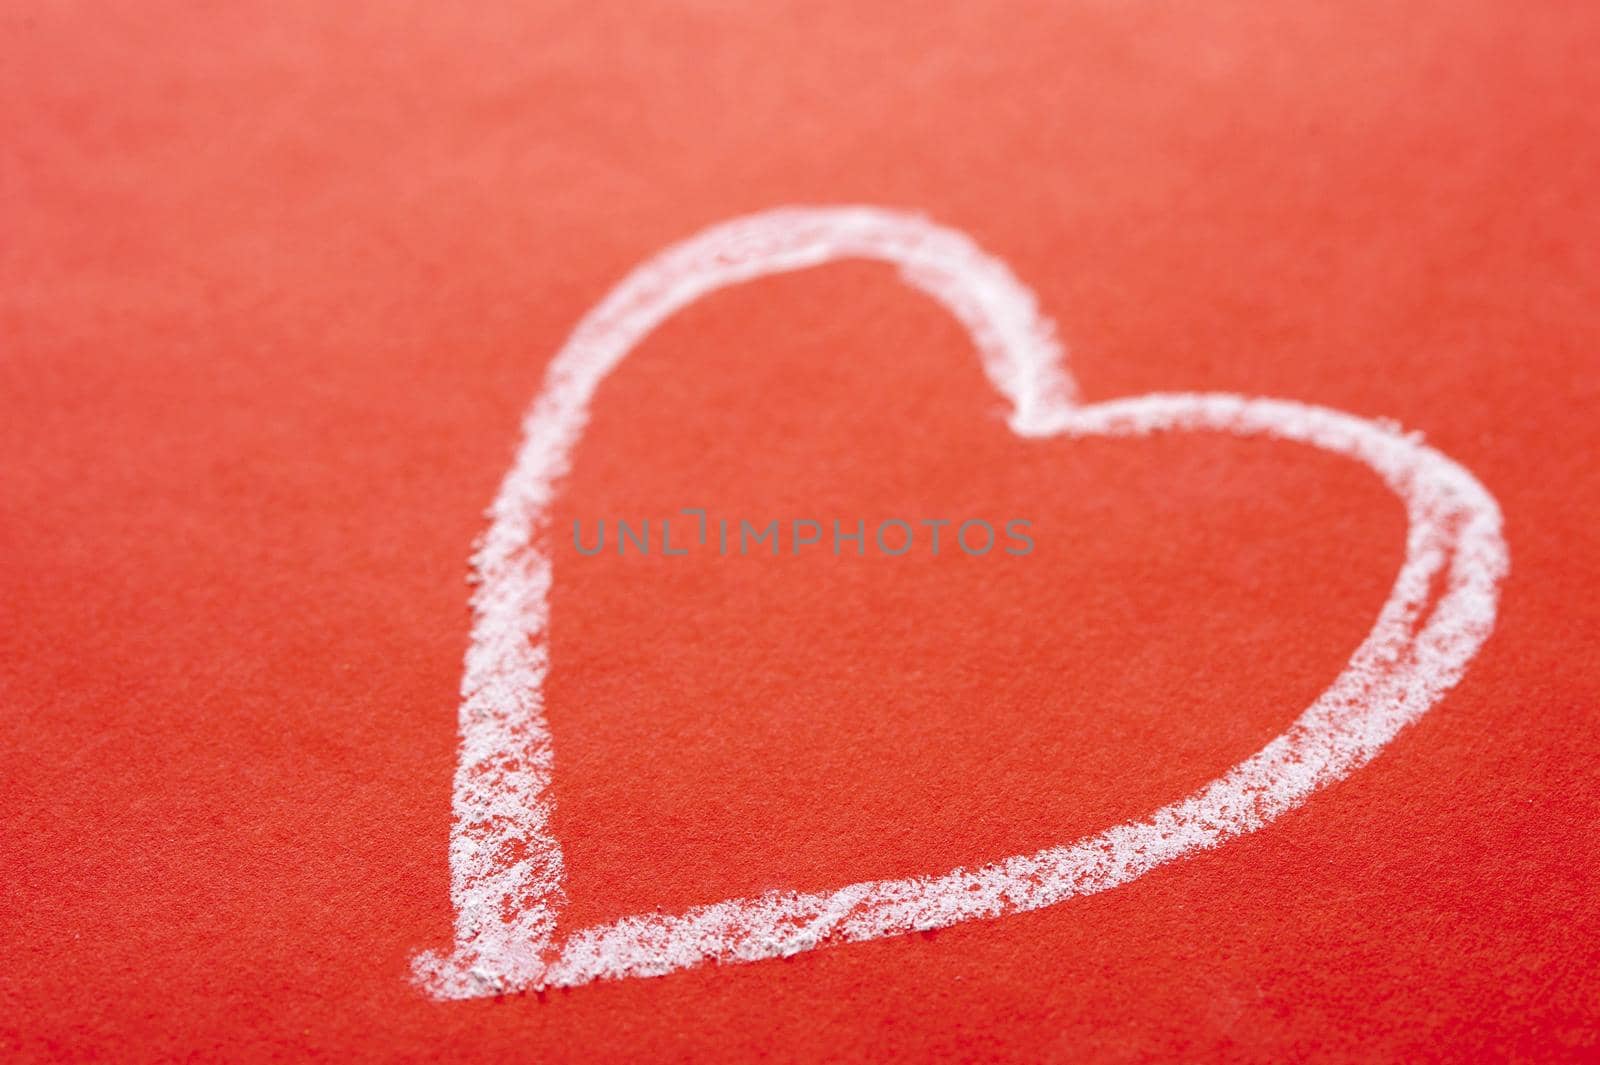 White chalk hand drawn Valentines heart on a textured red background with copyspace for a message to your sweetheart